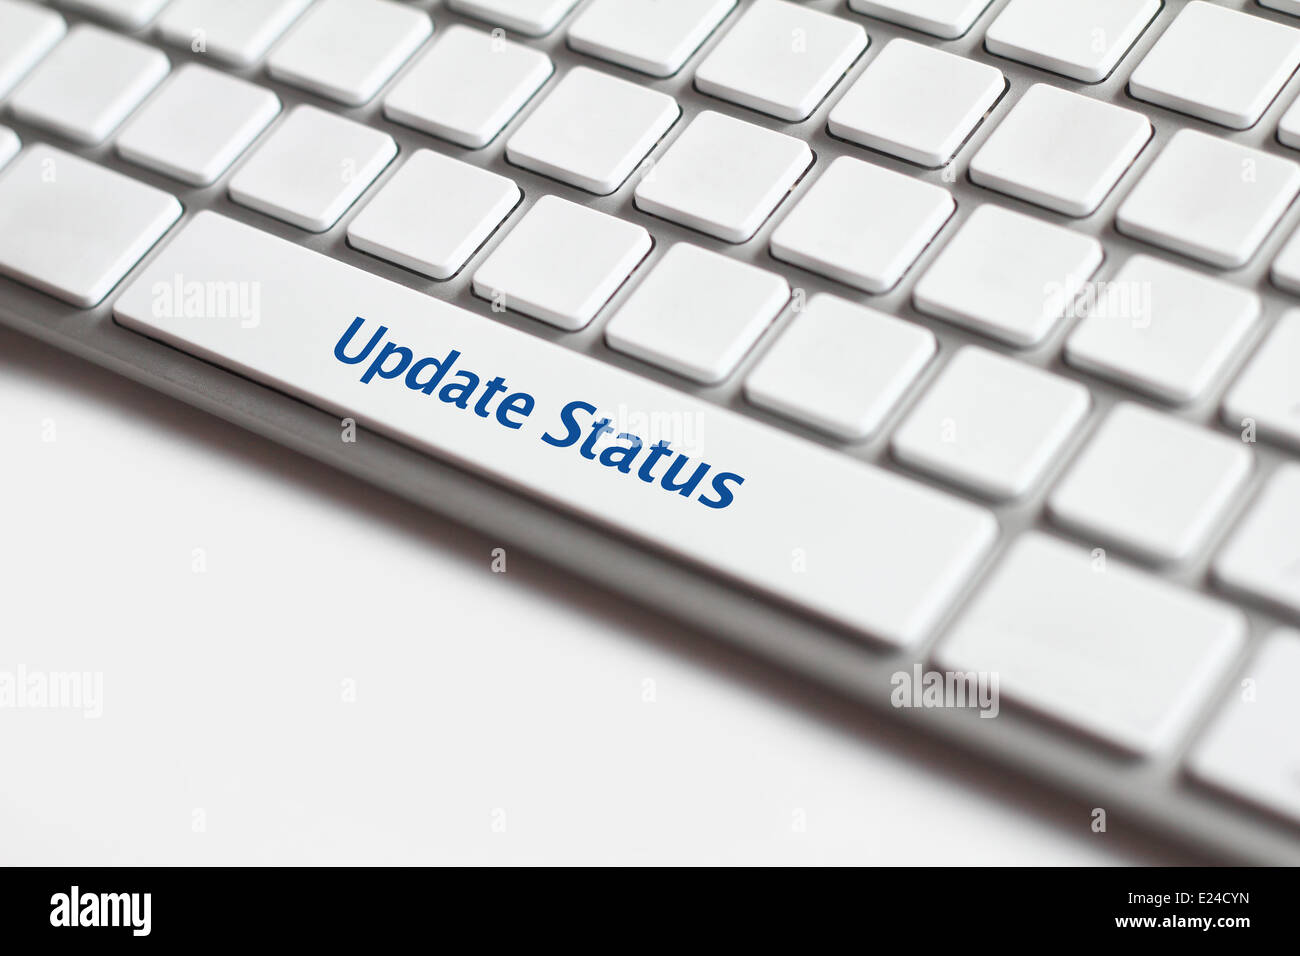 Photo of update status button on the white keyboard. Stock Photo